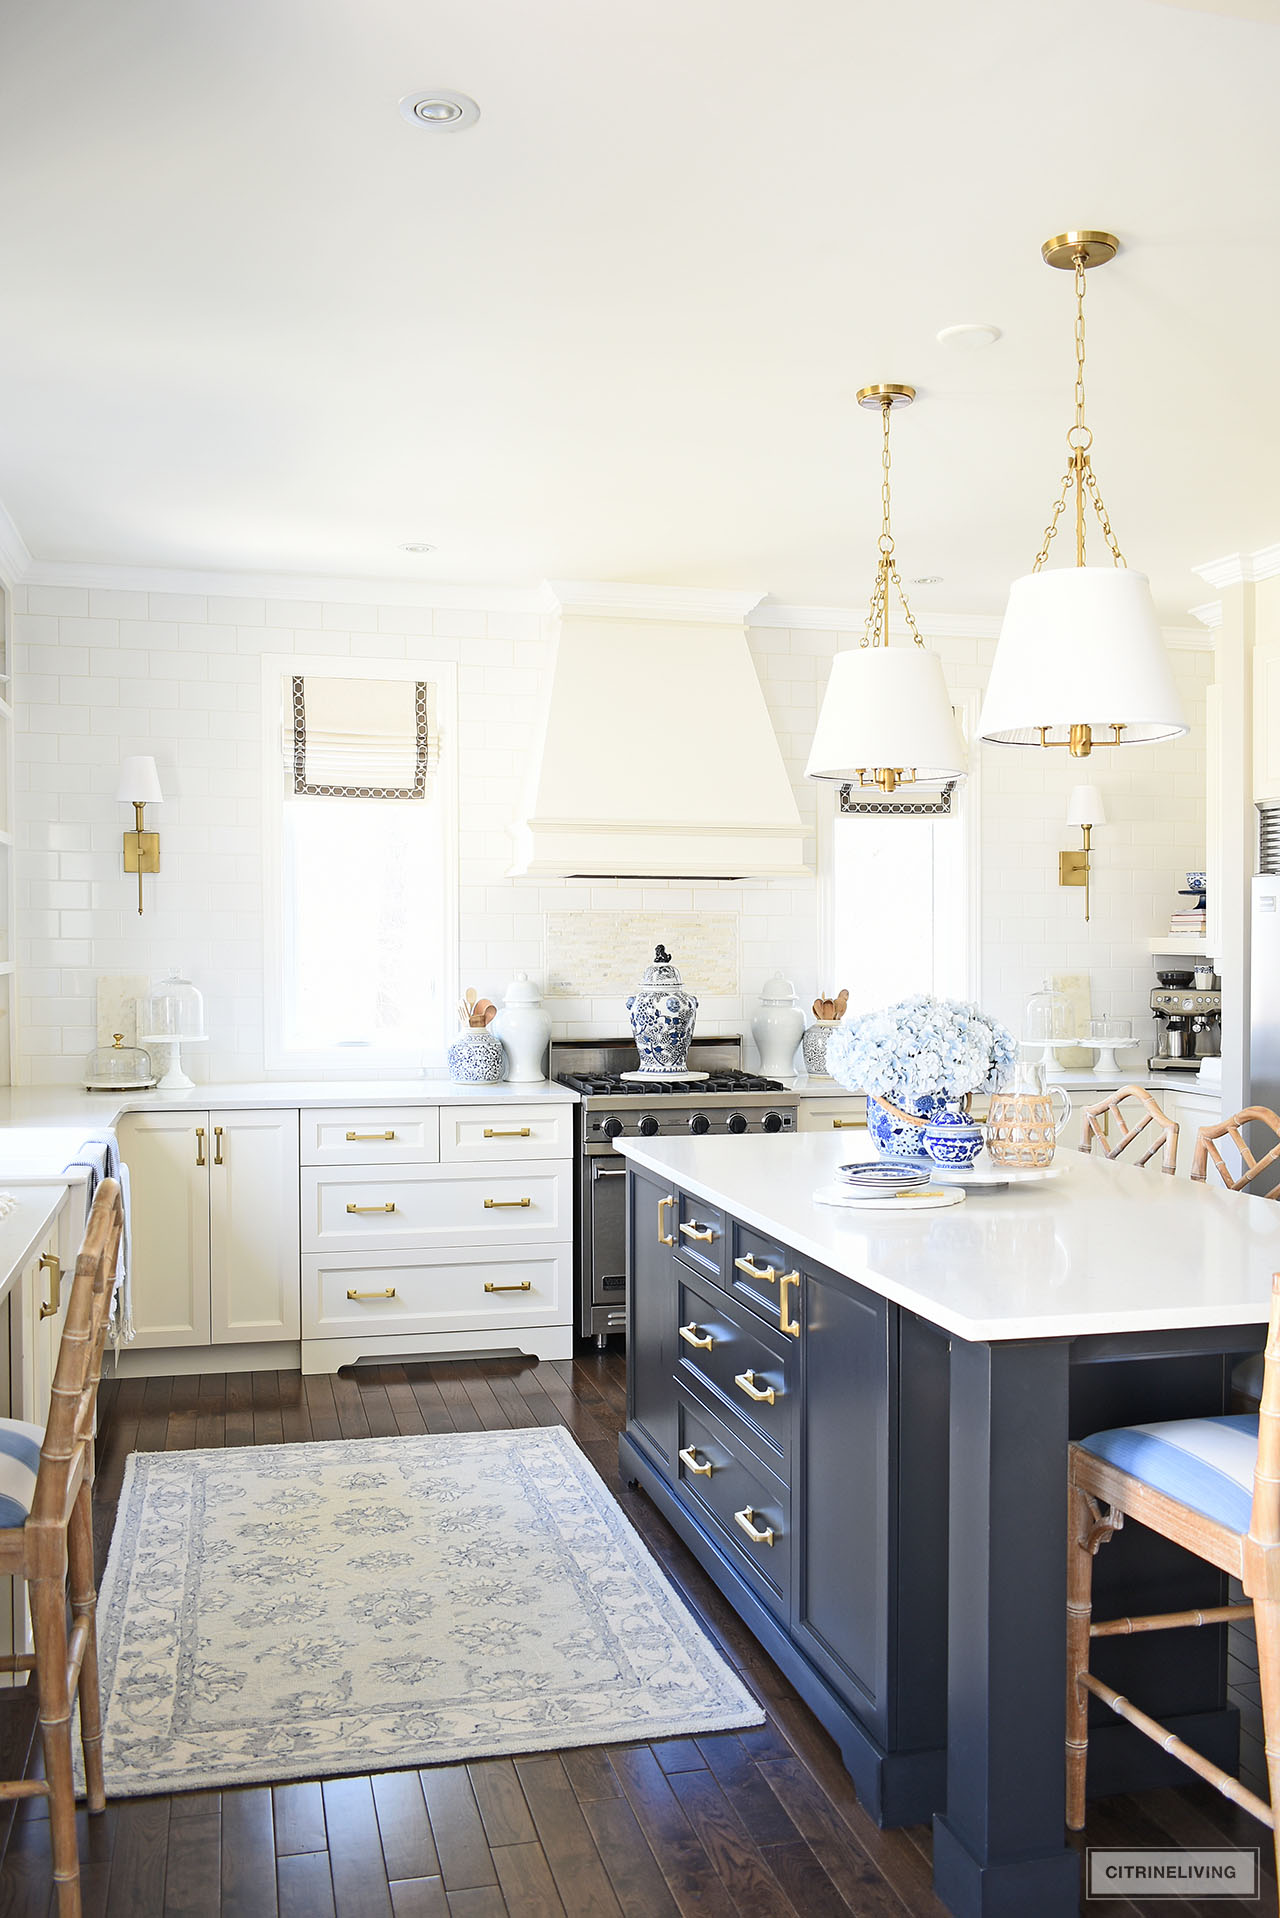 Beautiful white and black kitchen decorated for spring with blue and white accents and faux flowers.